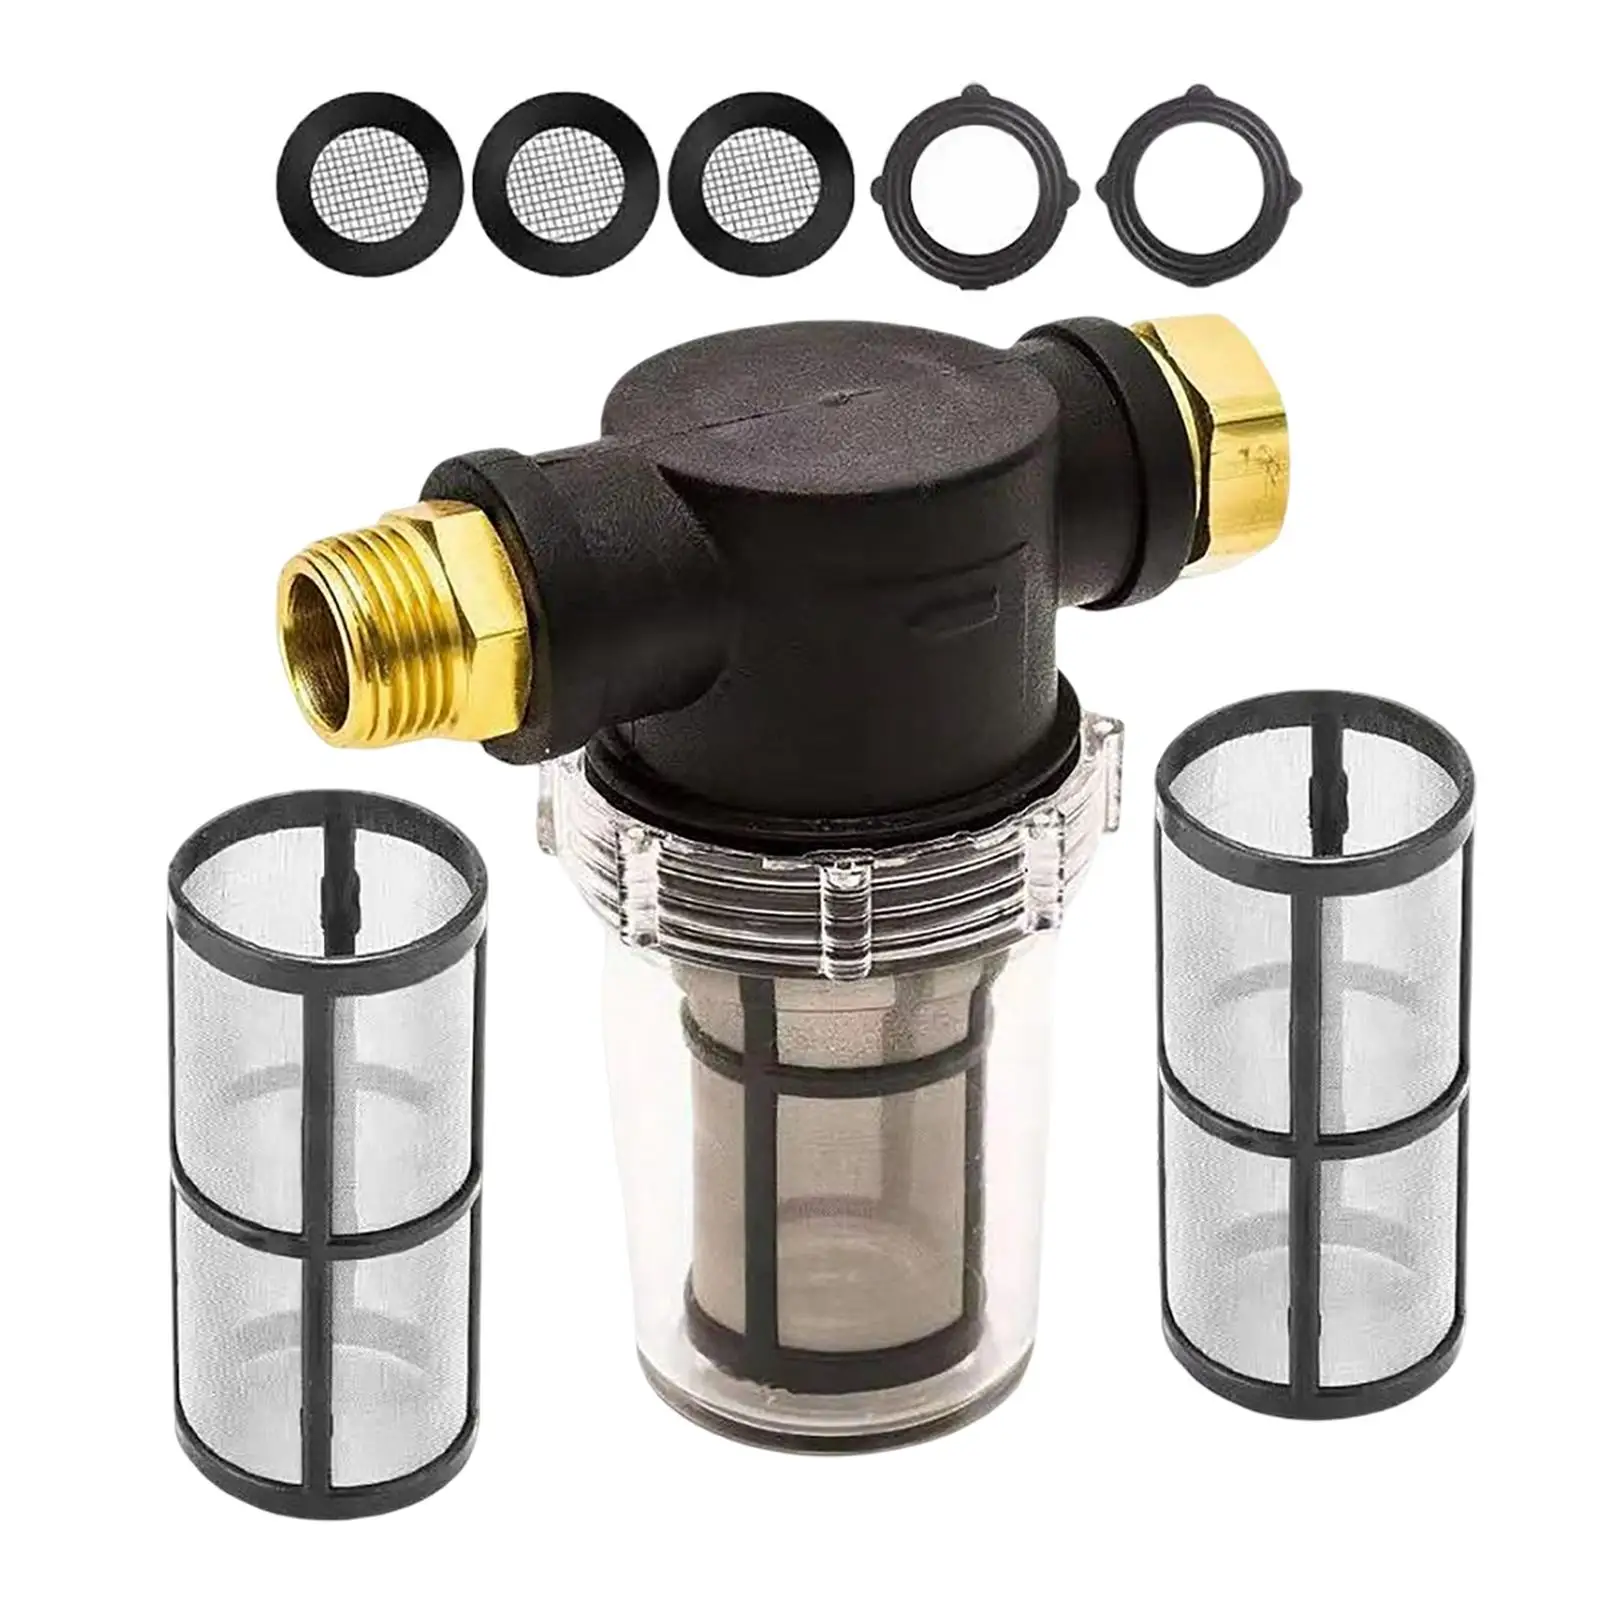 Filter for Pressure Washer Inlet Water with Washer Water Strainer Filter Garden Hose Sediment Filter for RV